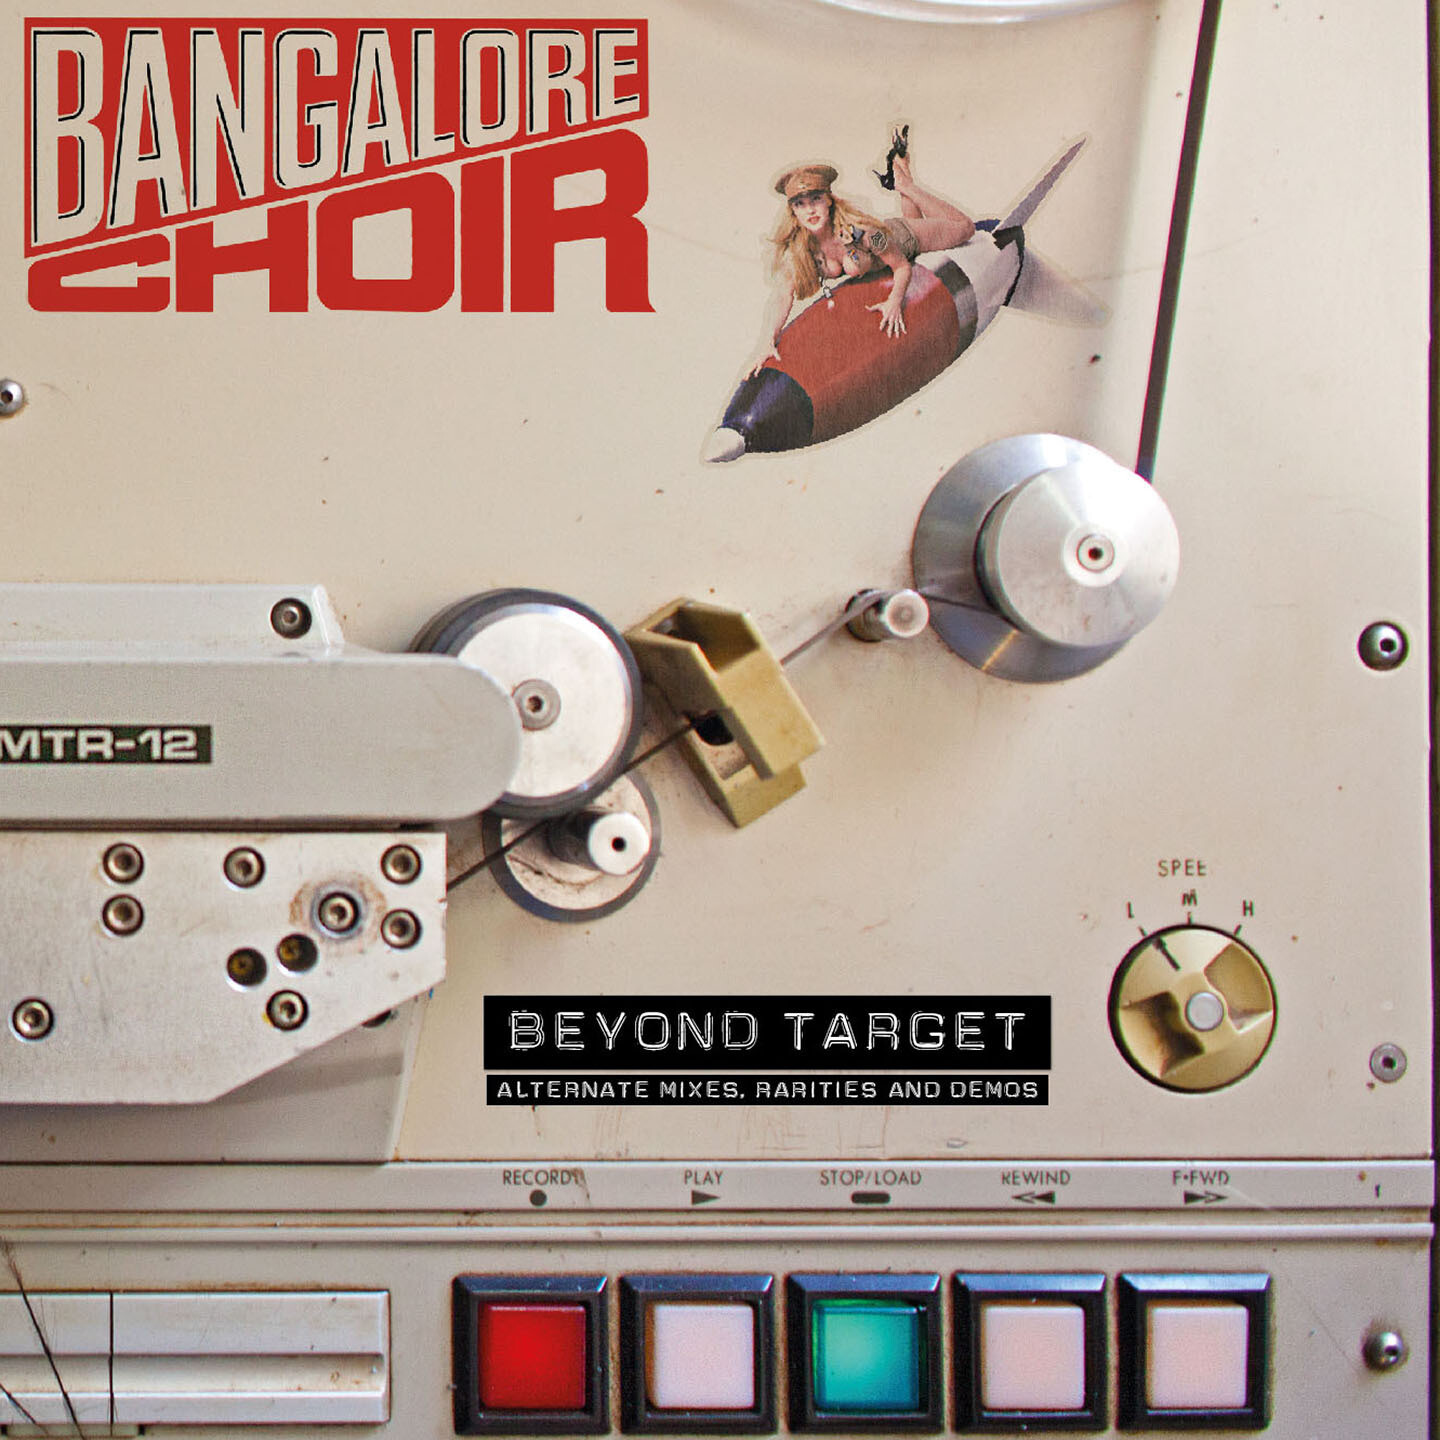 Bangalore Choir 	Beyond Target - The Demos / 
This extremely limited edition is only available by mail order directly from Global Rock Records - The Store For Music.